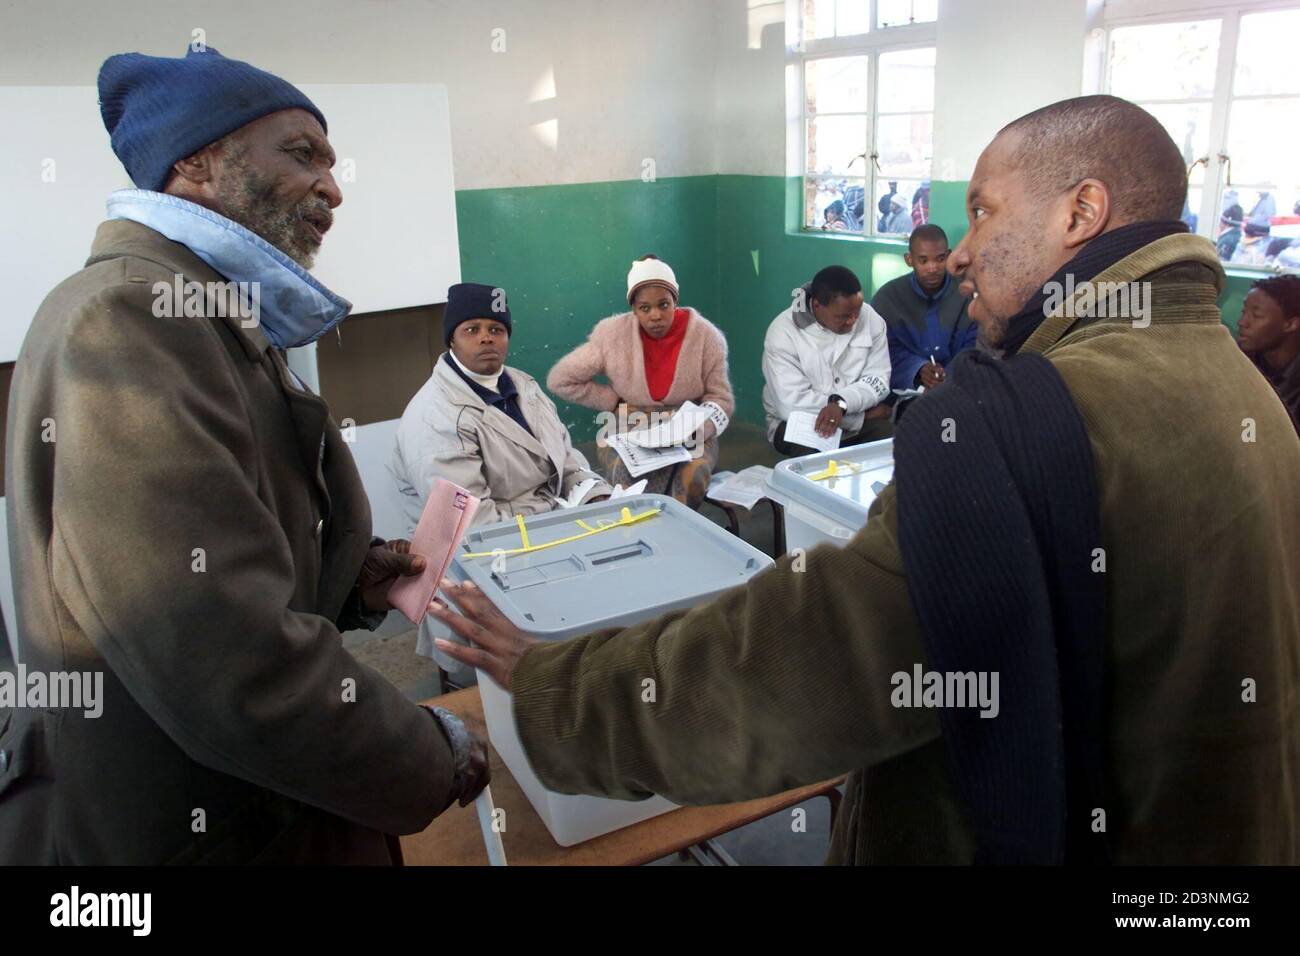 An election officer explains new dual voting procedures to a confused voter as Lesotho's general election gets underway May 25, 2002. The tiny southern African mountain kingdom is holding it's first election under a new electoral system with 19 political parties competing for 80 constituency and 40 proportional representation seats. REUTERS/Mike Hutchings  MH/ Stock Photo